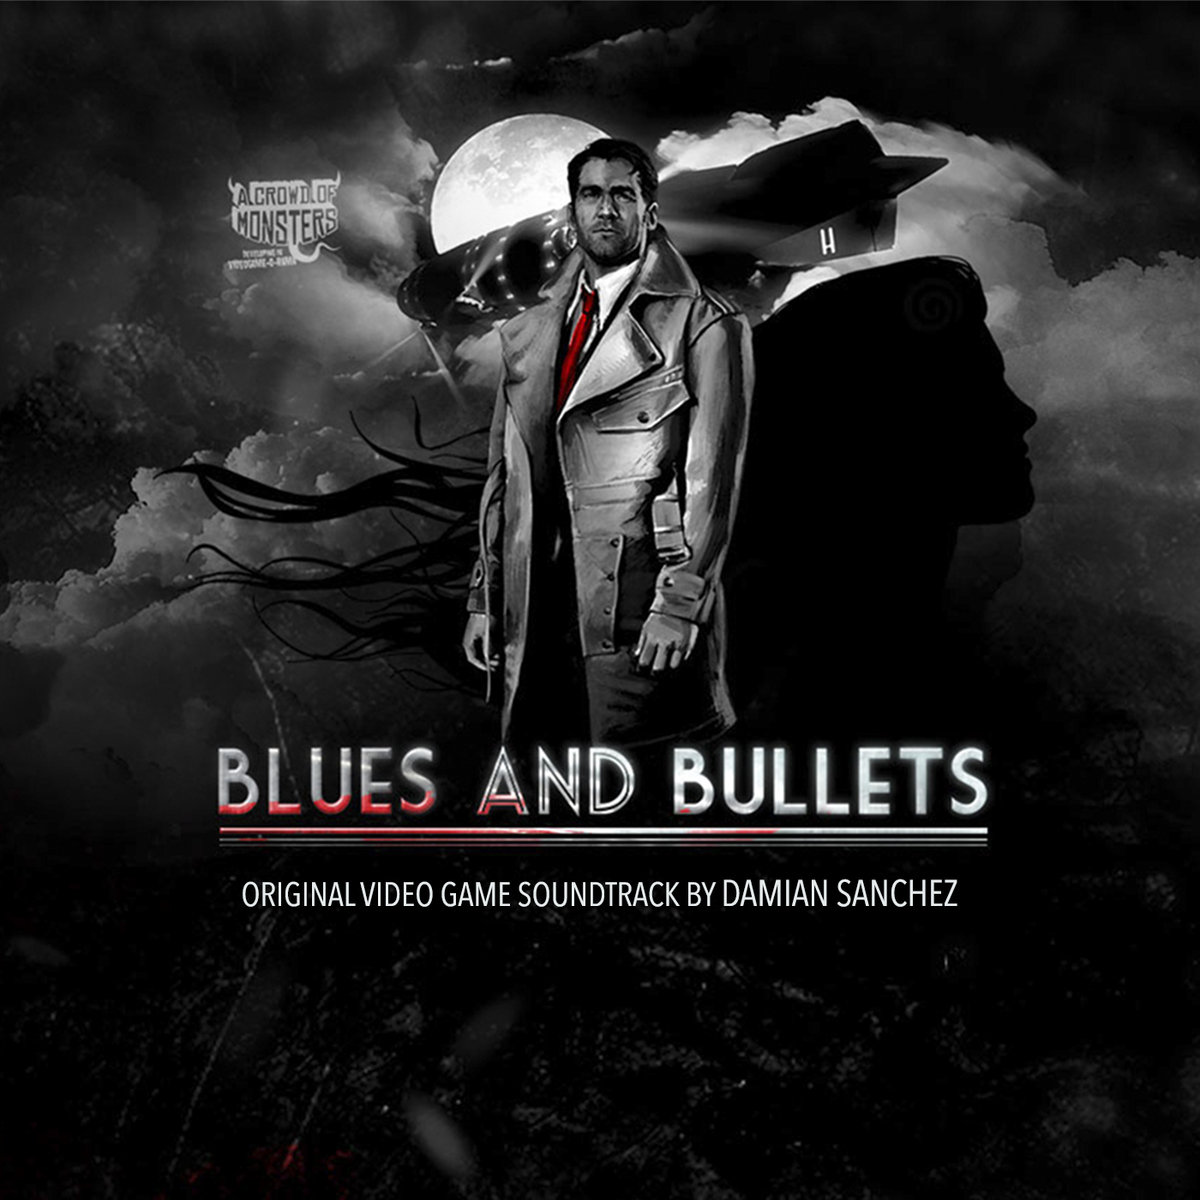 Blues And Bullets HD wallpapers, Desktop wallpaper - most viewed